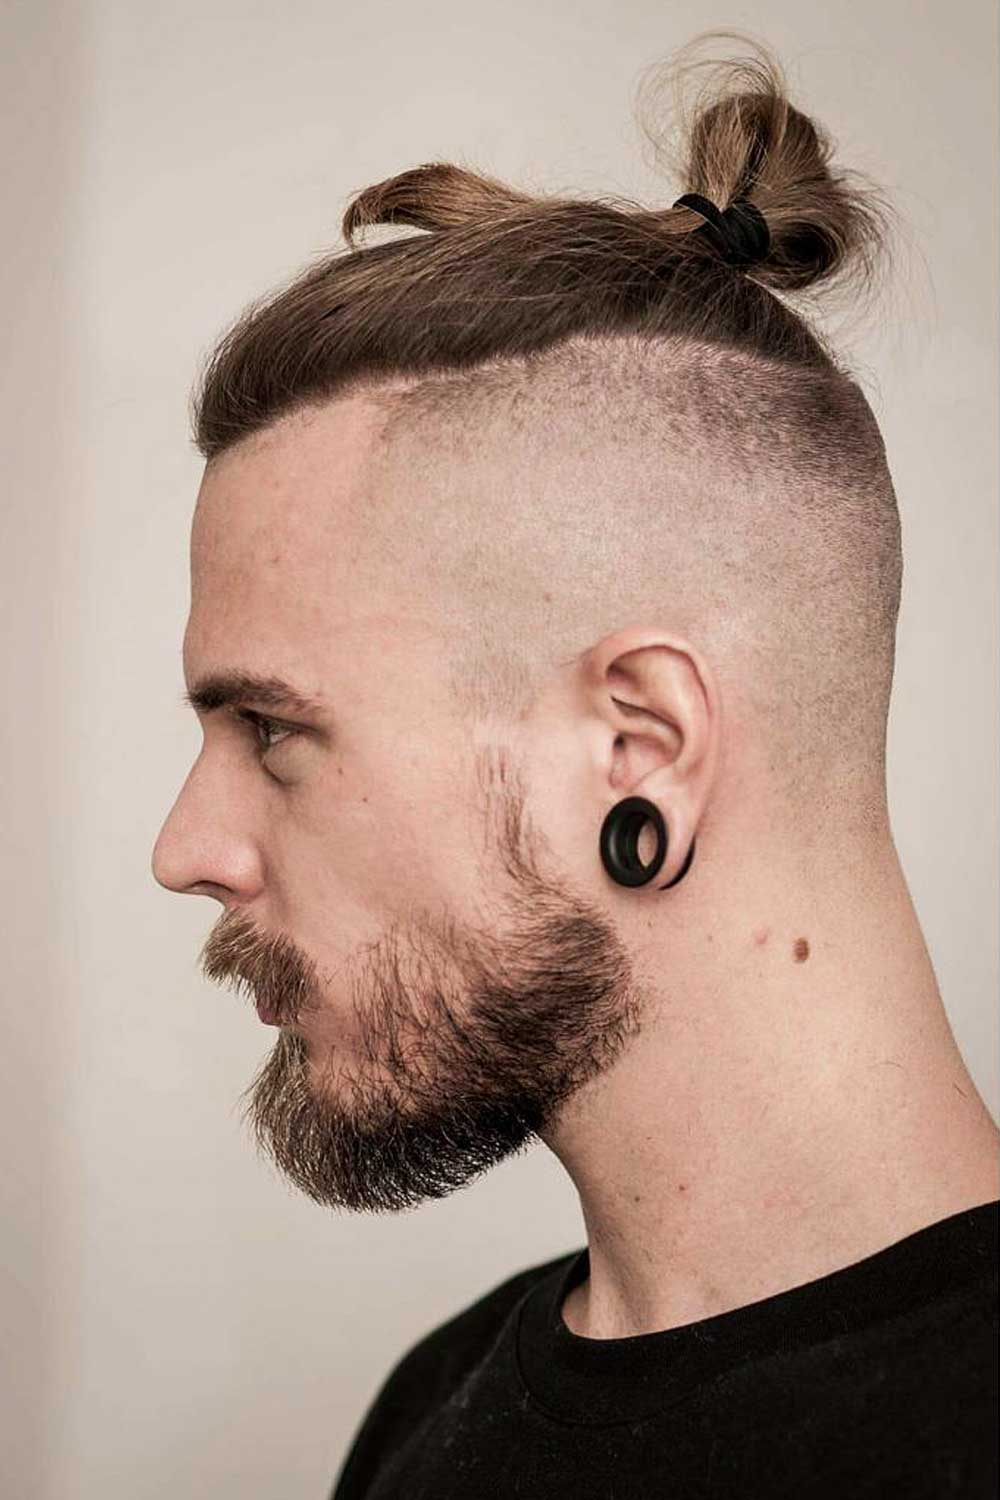 Undercut hairstyle disconnected - Men's hair & styling Inspiration - YouTube